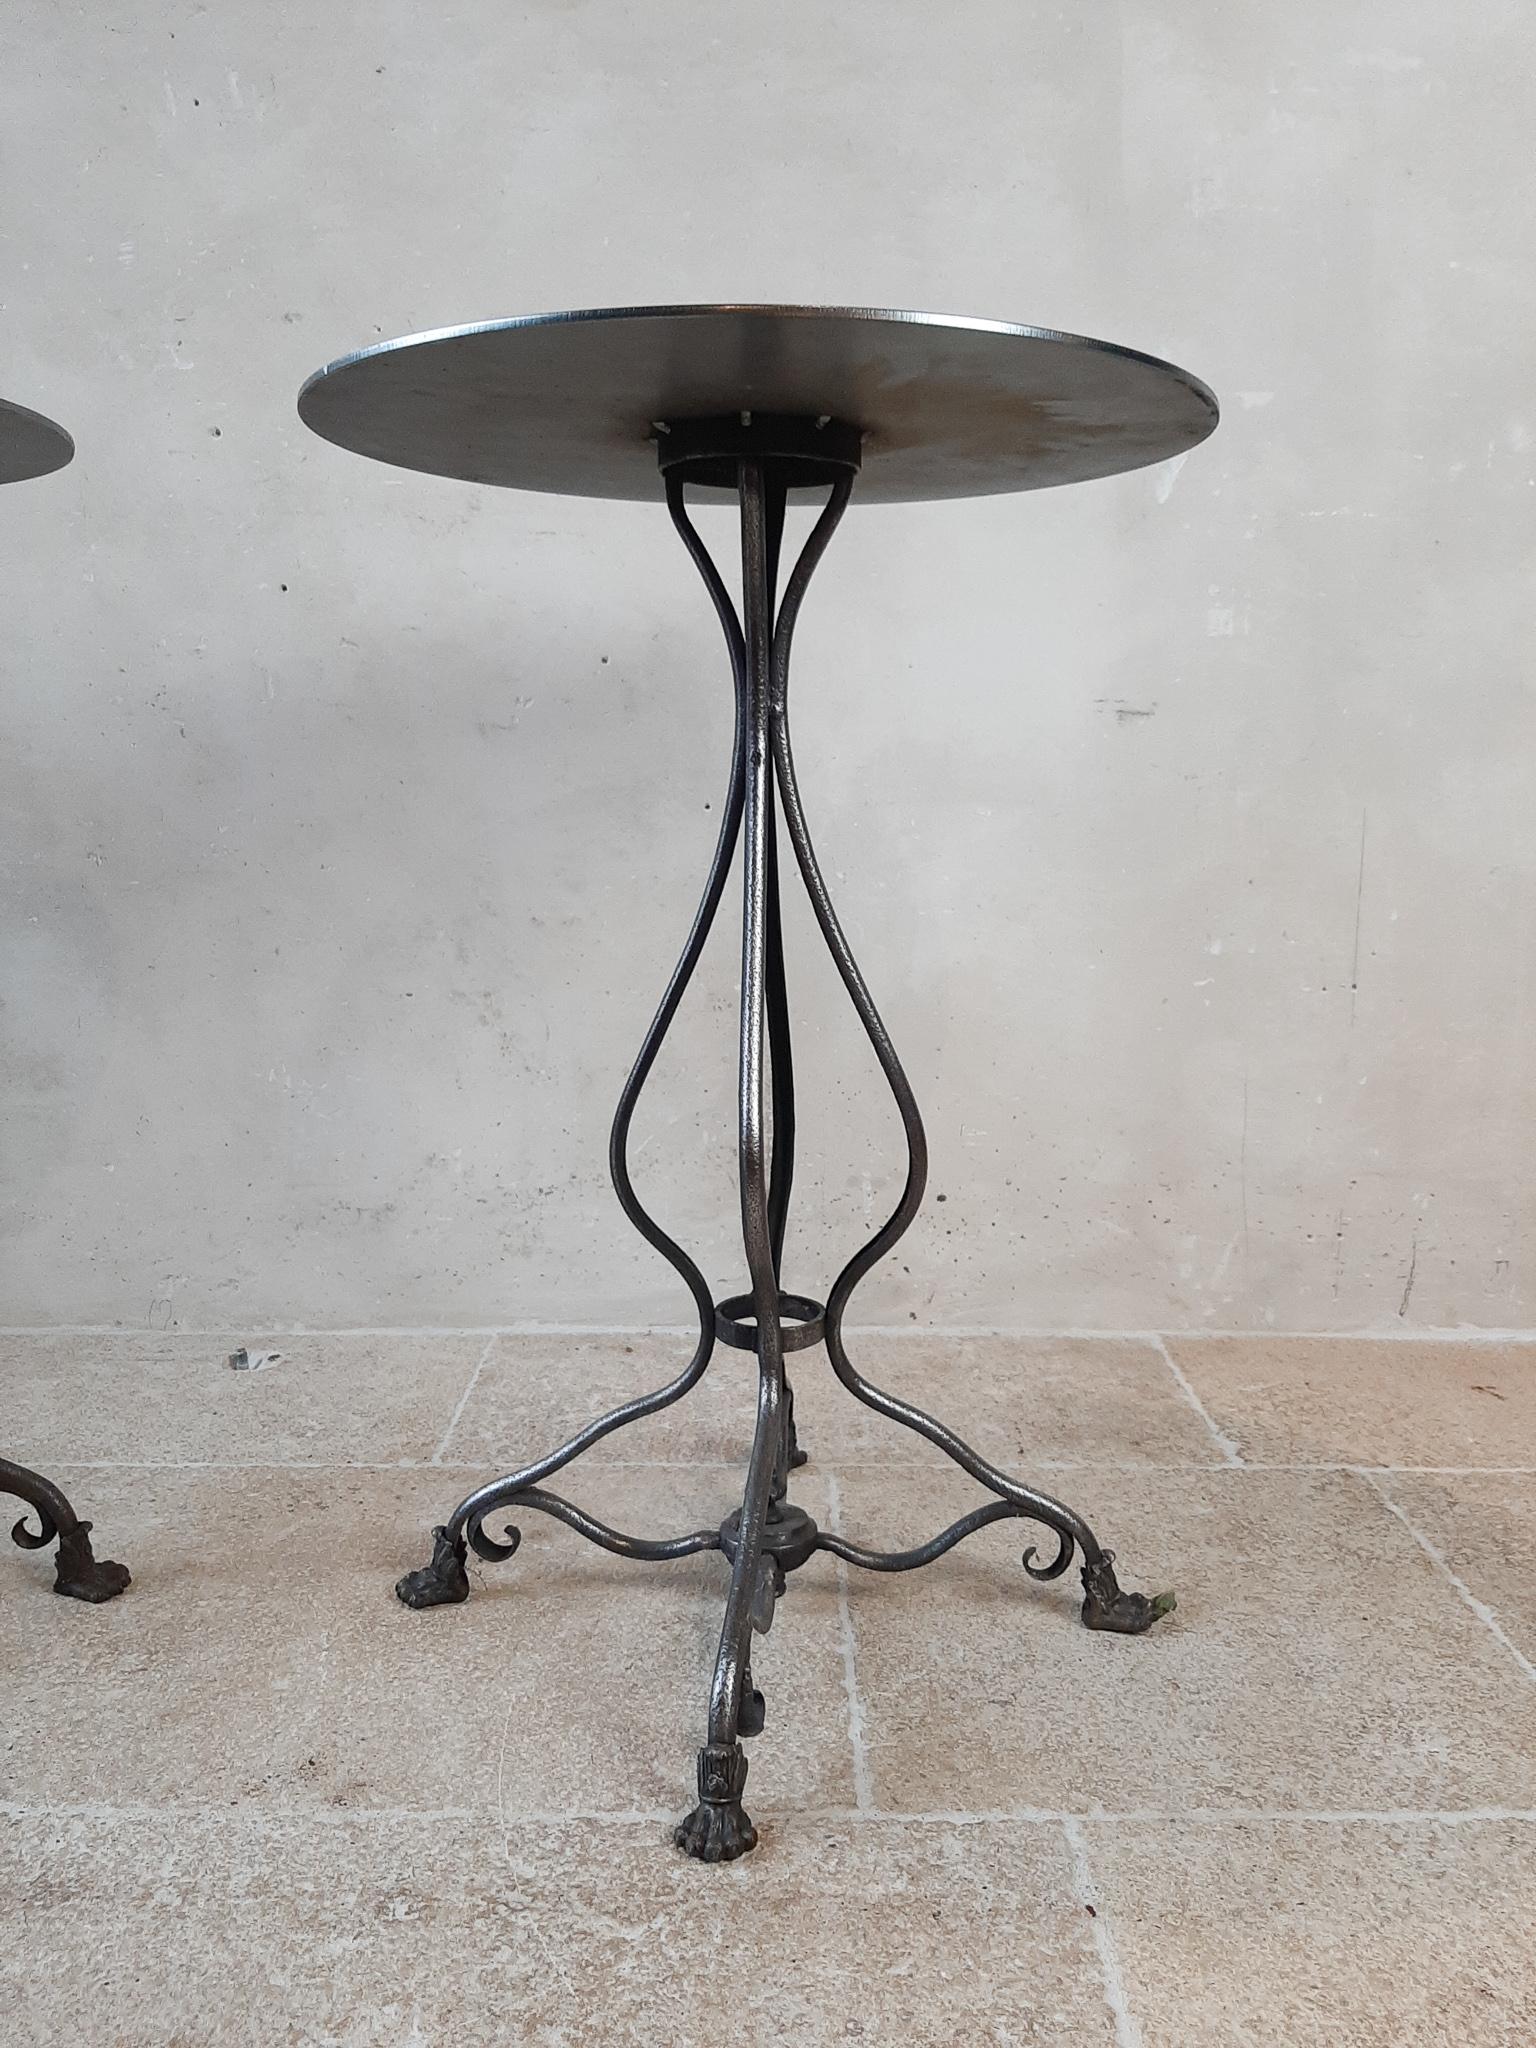 19th Century Pair of Antique French Round Guéridon Tables, Arras